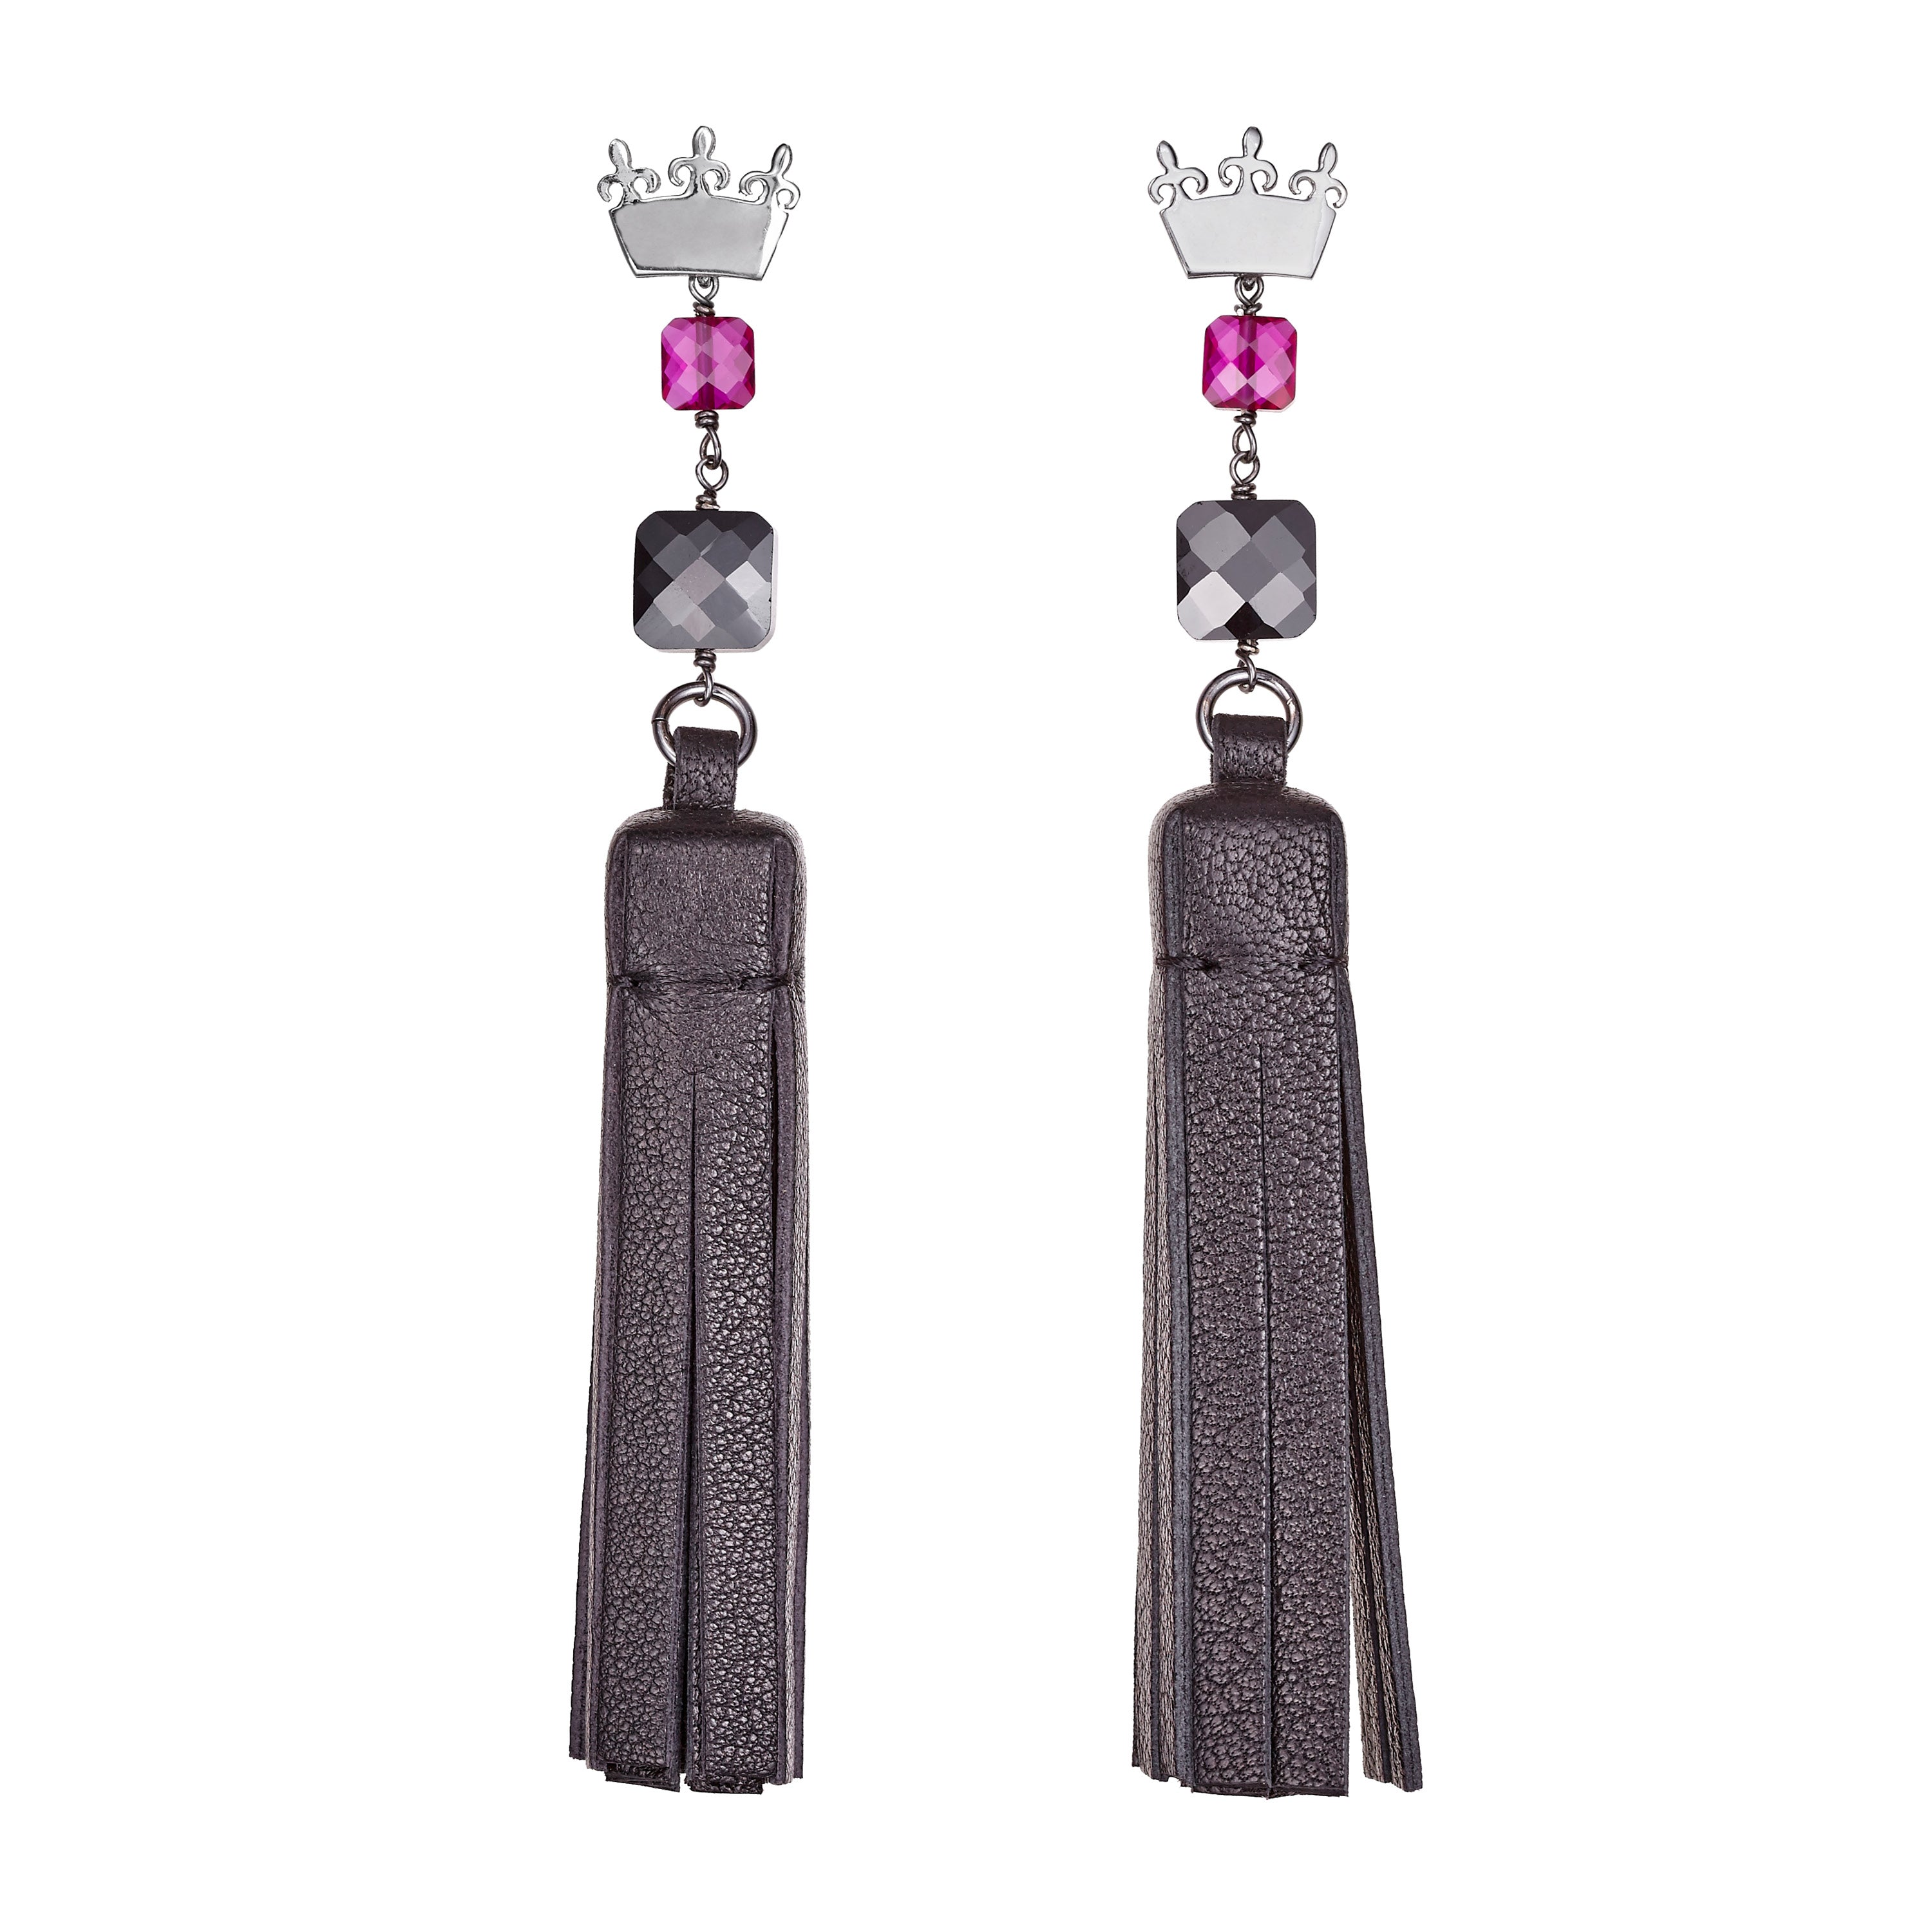 Tassel “Square” Earrings with Black Leather and Zircons